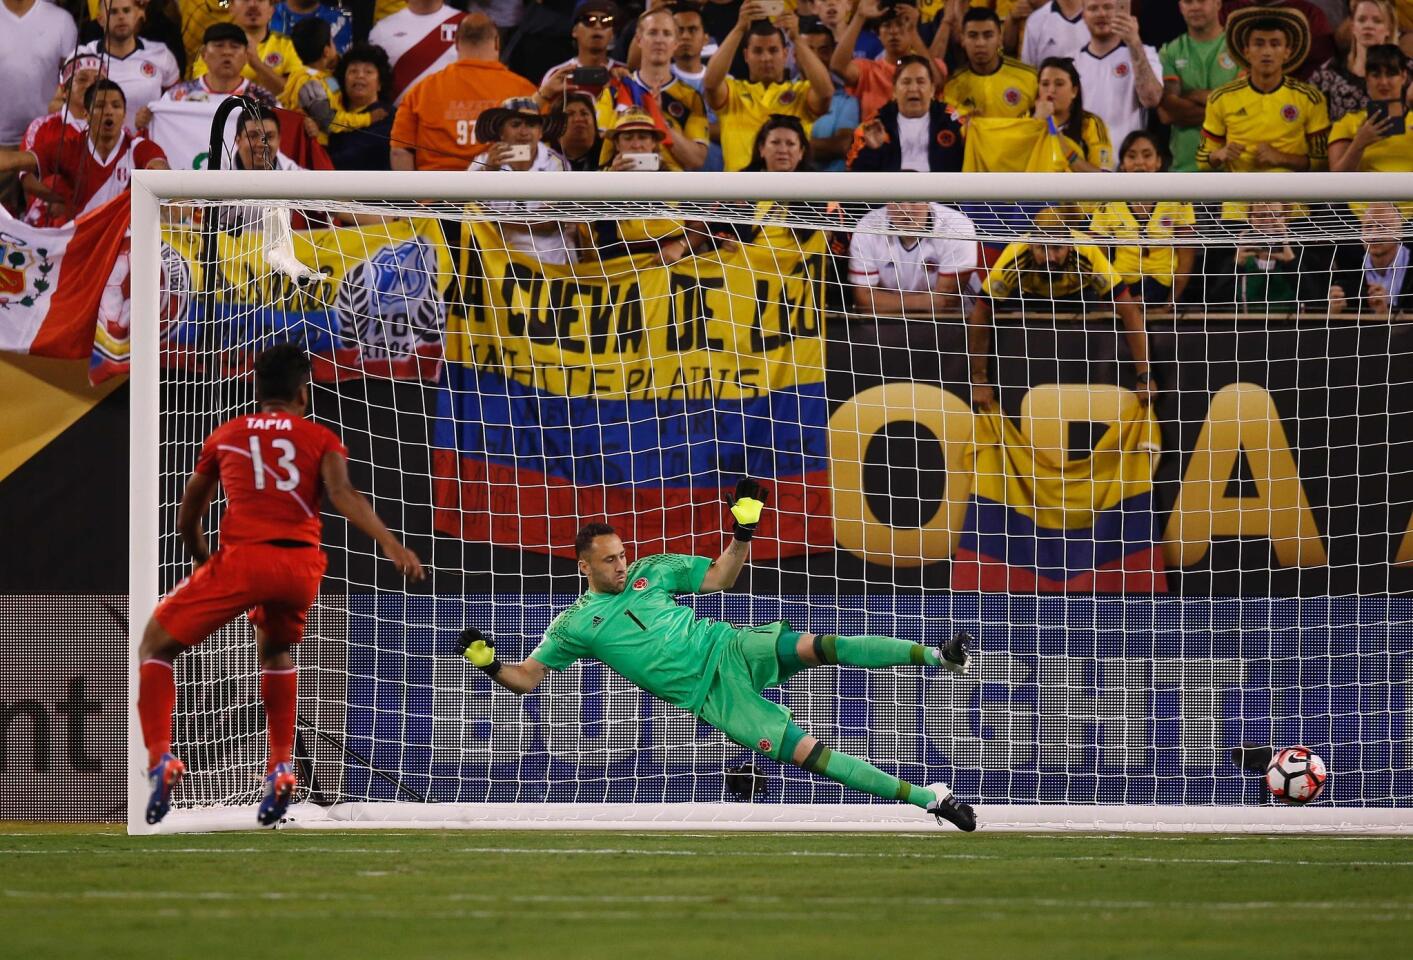 Colombia's goalkeeper David Ospina looks at the ball after Peru's Renato Tapia scored a penalty during the Copa America Centenario quarterfinal football match against Peru in East Rutherford, New Jersey, United States, on June 17, 2016. / AFP PHOTO / Eduardo Munoz AlvarezEDUARDO MUNOZ ALVAREZ/AFP/Getty Images ** OUTS - ELSENT, FPG, CM - OUTS * NM, PH, VA if sourced by CT, LA or MoD **